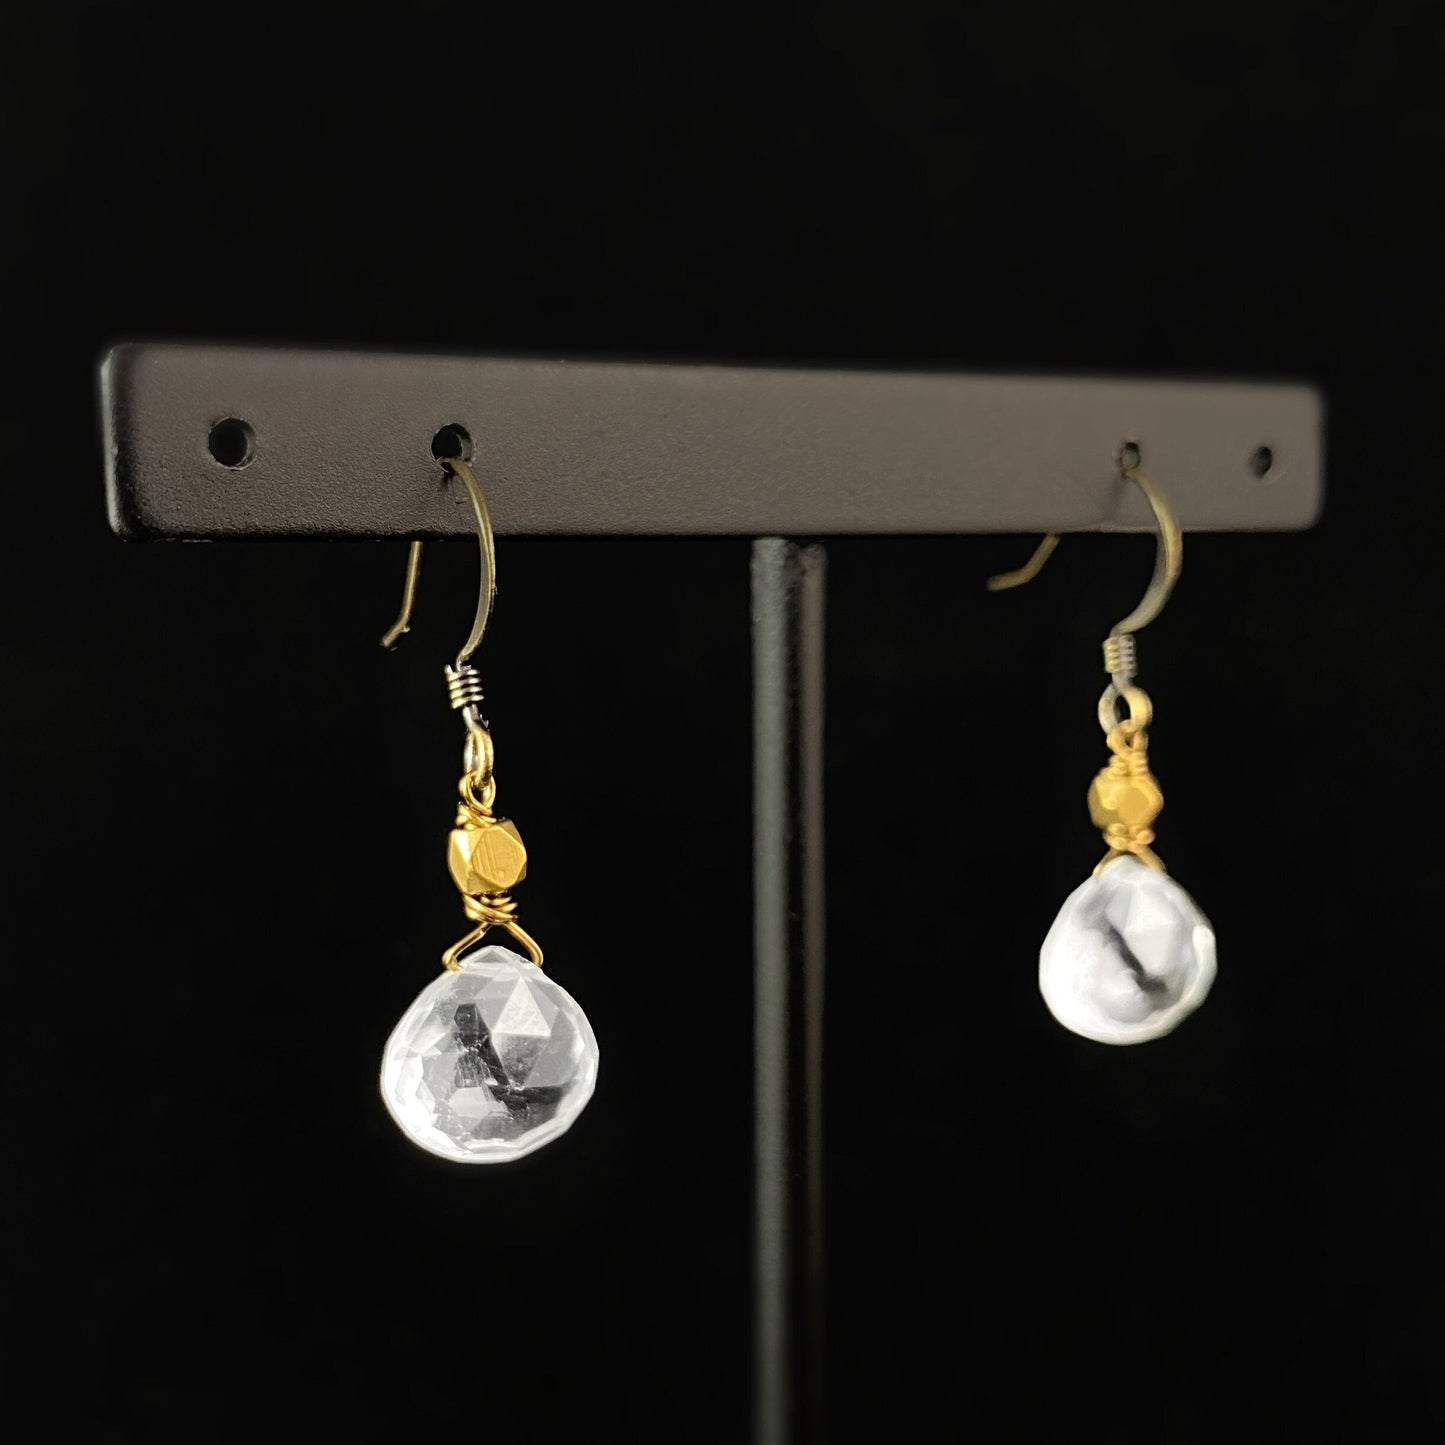 Boho Clear Quartz Droplet Earrings with Brass Bead Accent